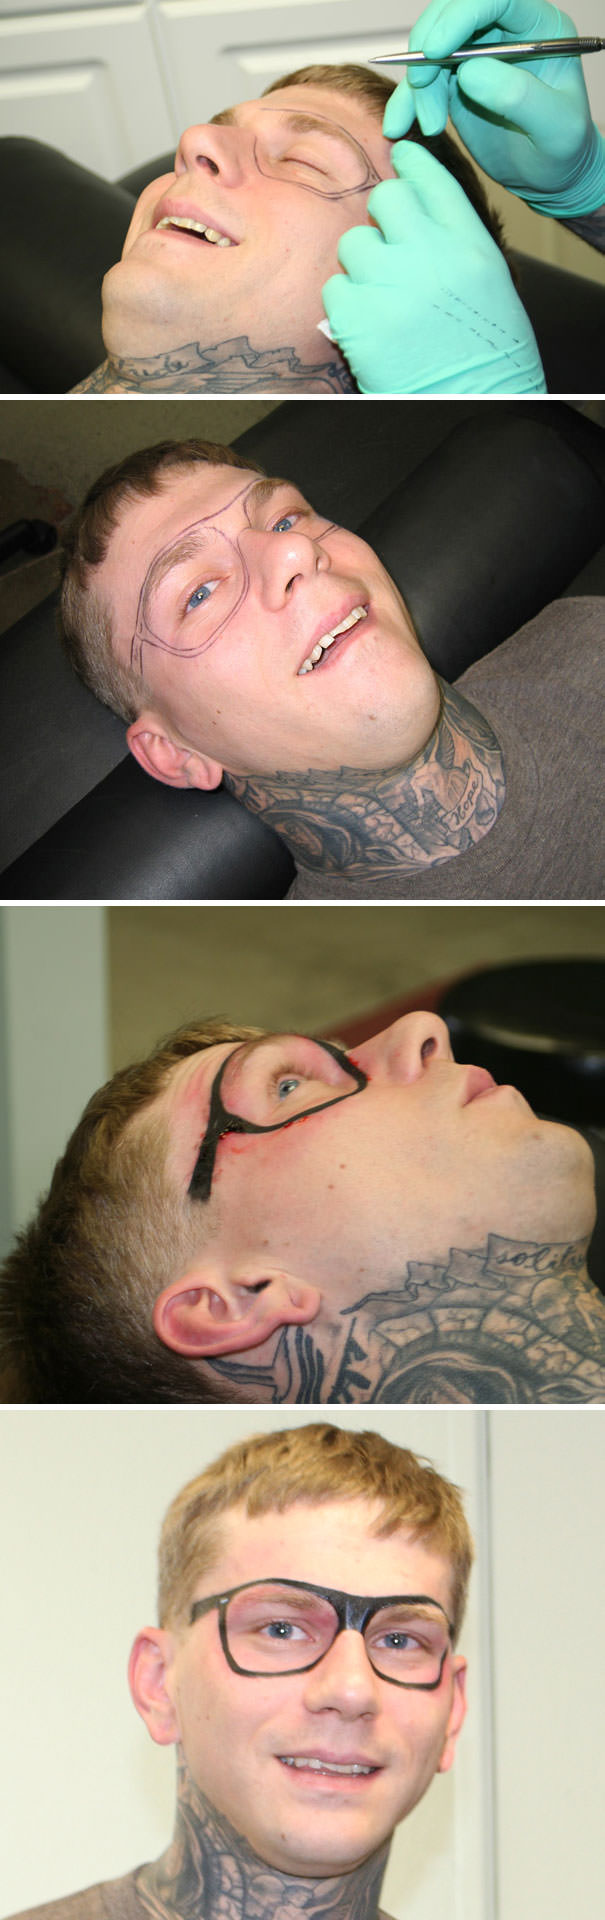 This guy got a sunglasses tattoo on his face